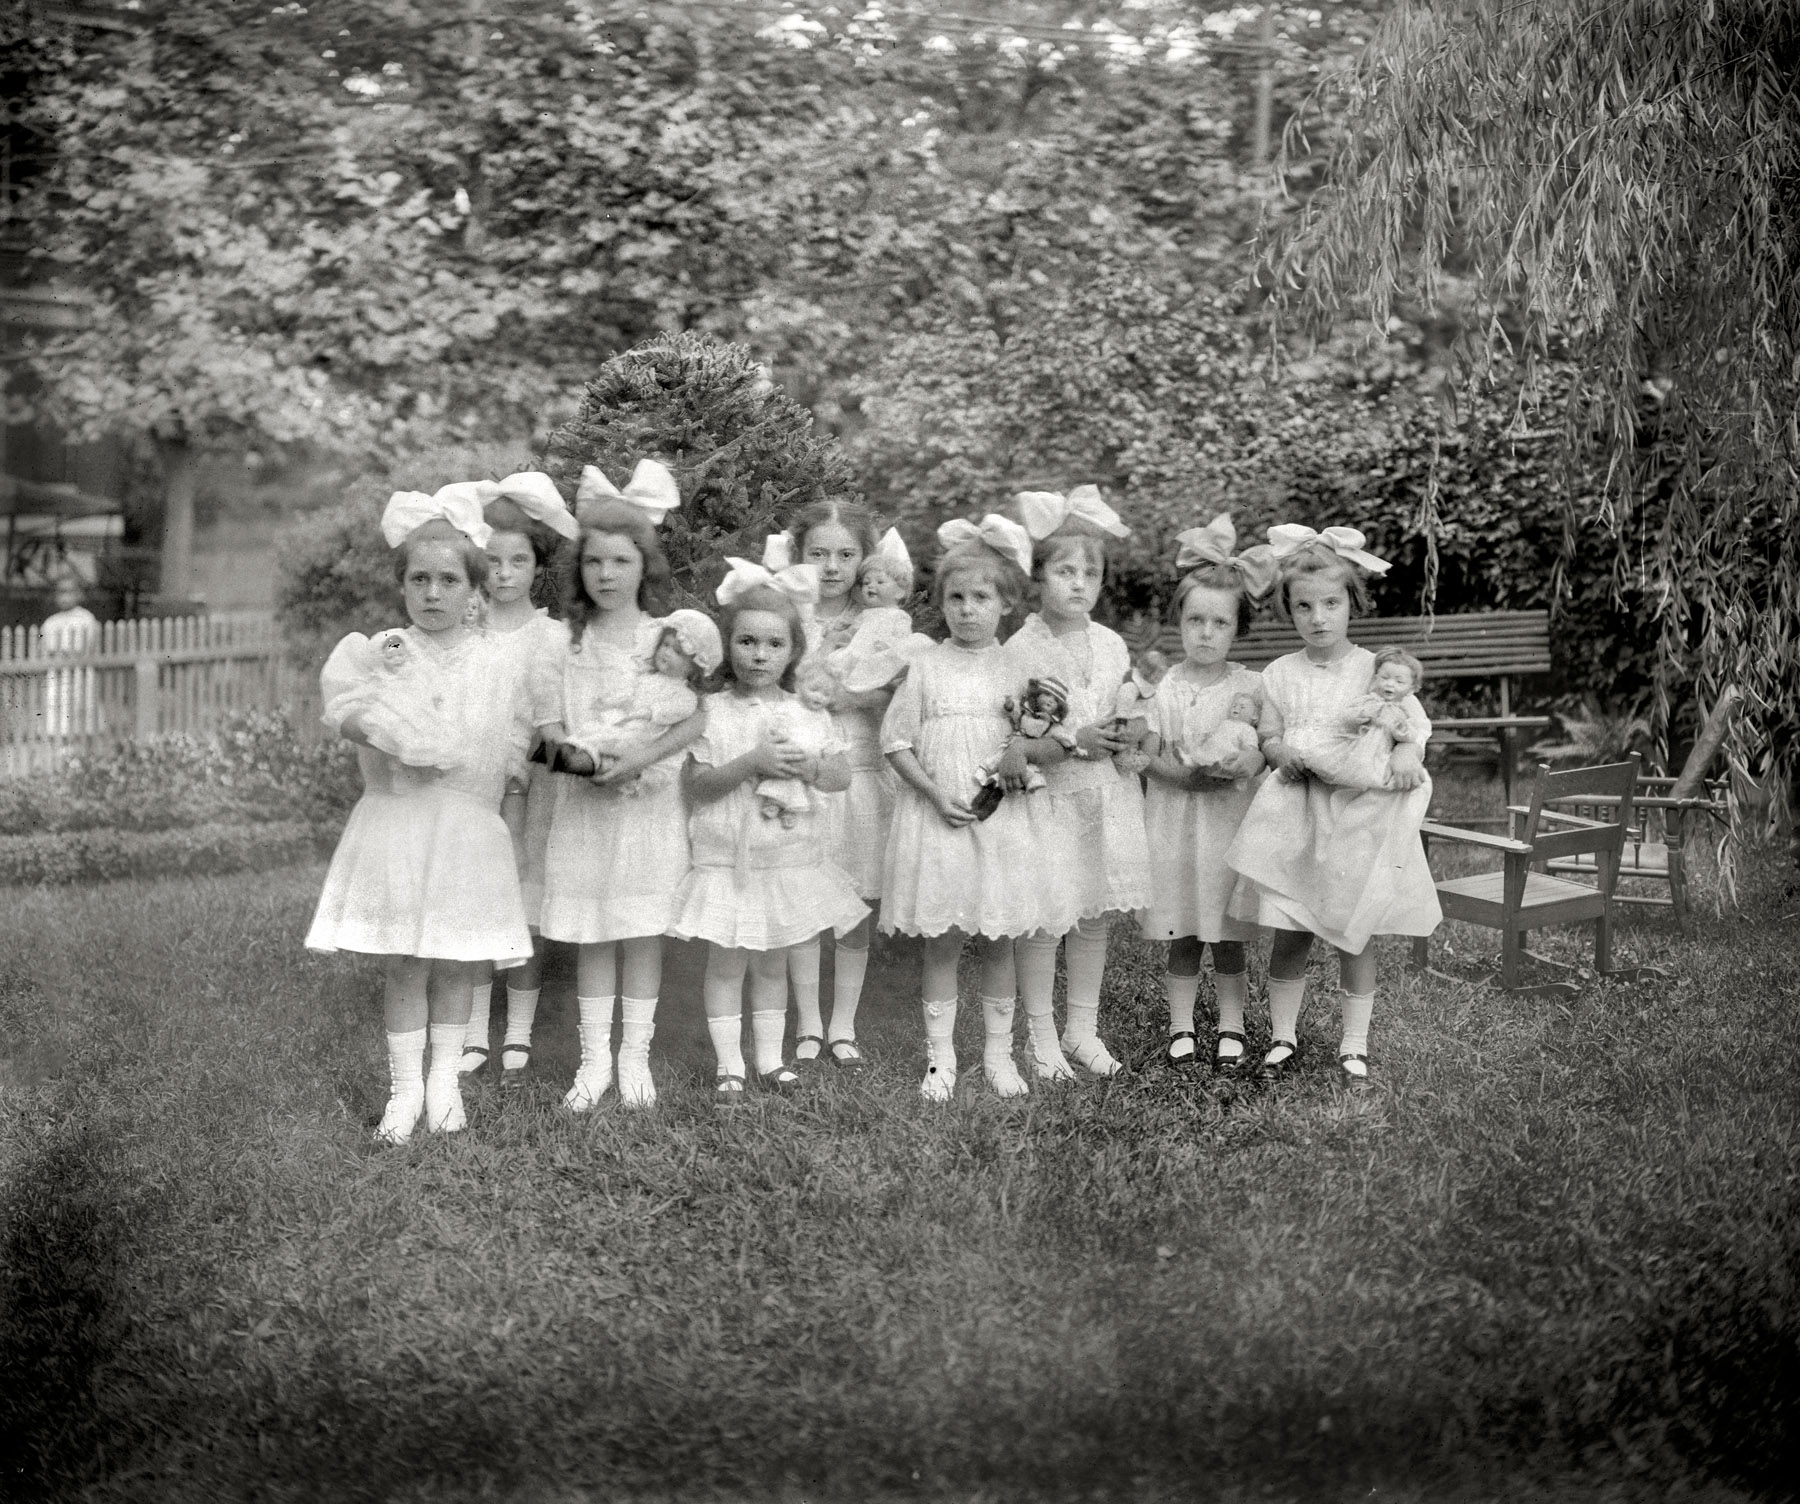 July 22, 1913. Washington, D.C. "Dorothy's party." At center is Dorothy French, daughter of National Photo Co. proprietor Herbert French. View full size.